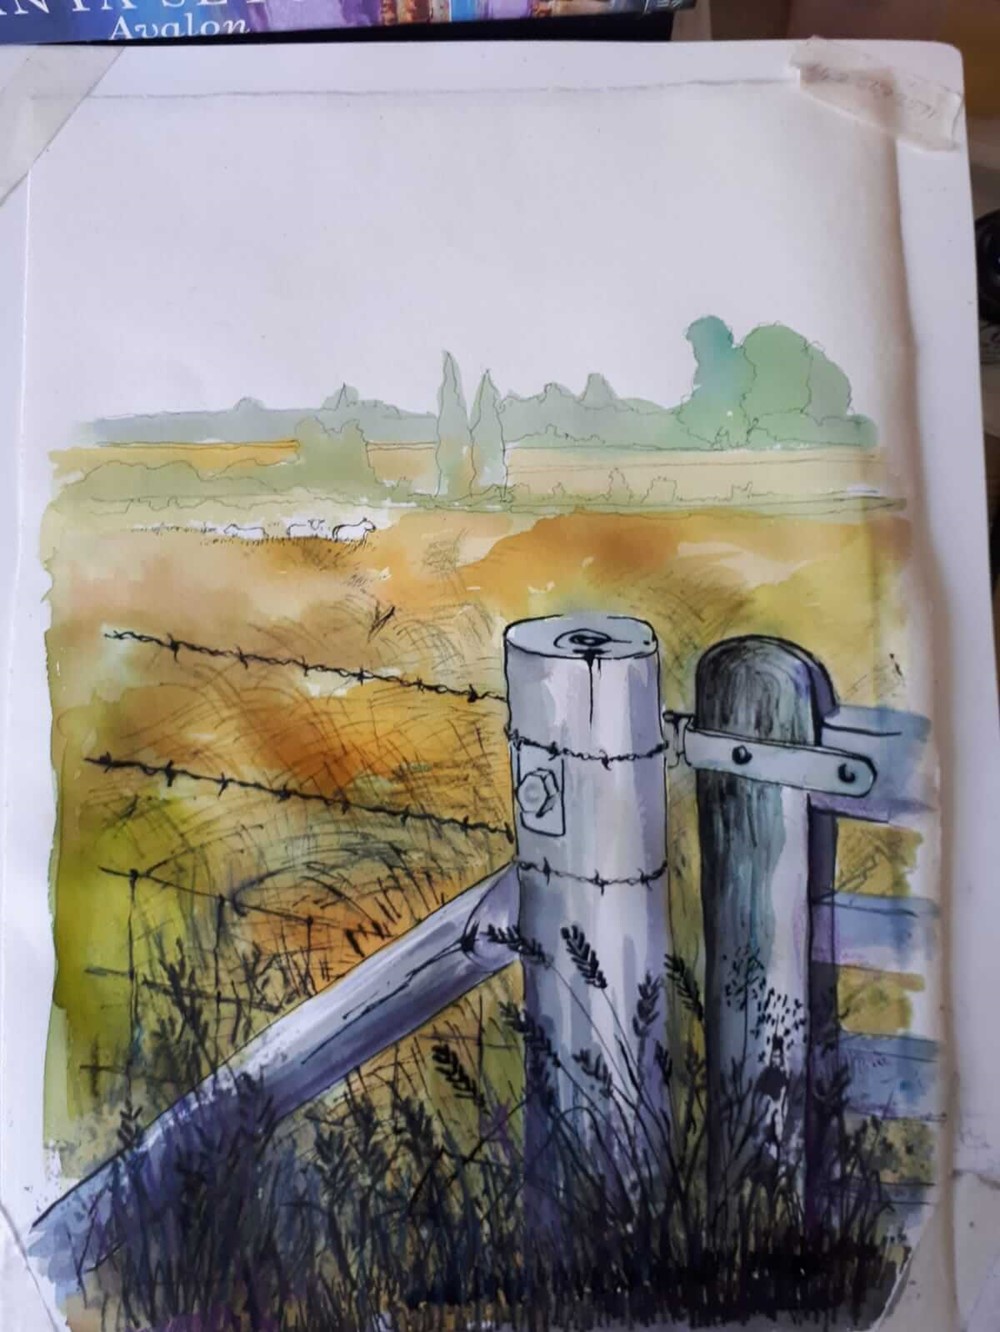 Student work, image of a field and fence from a drawing course